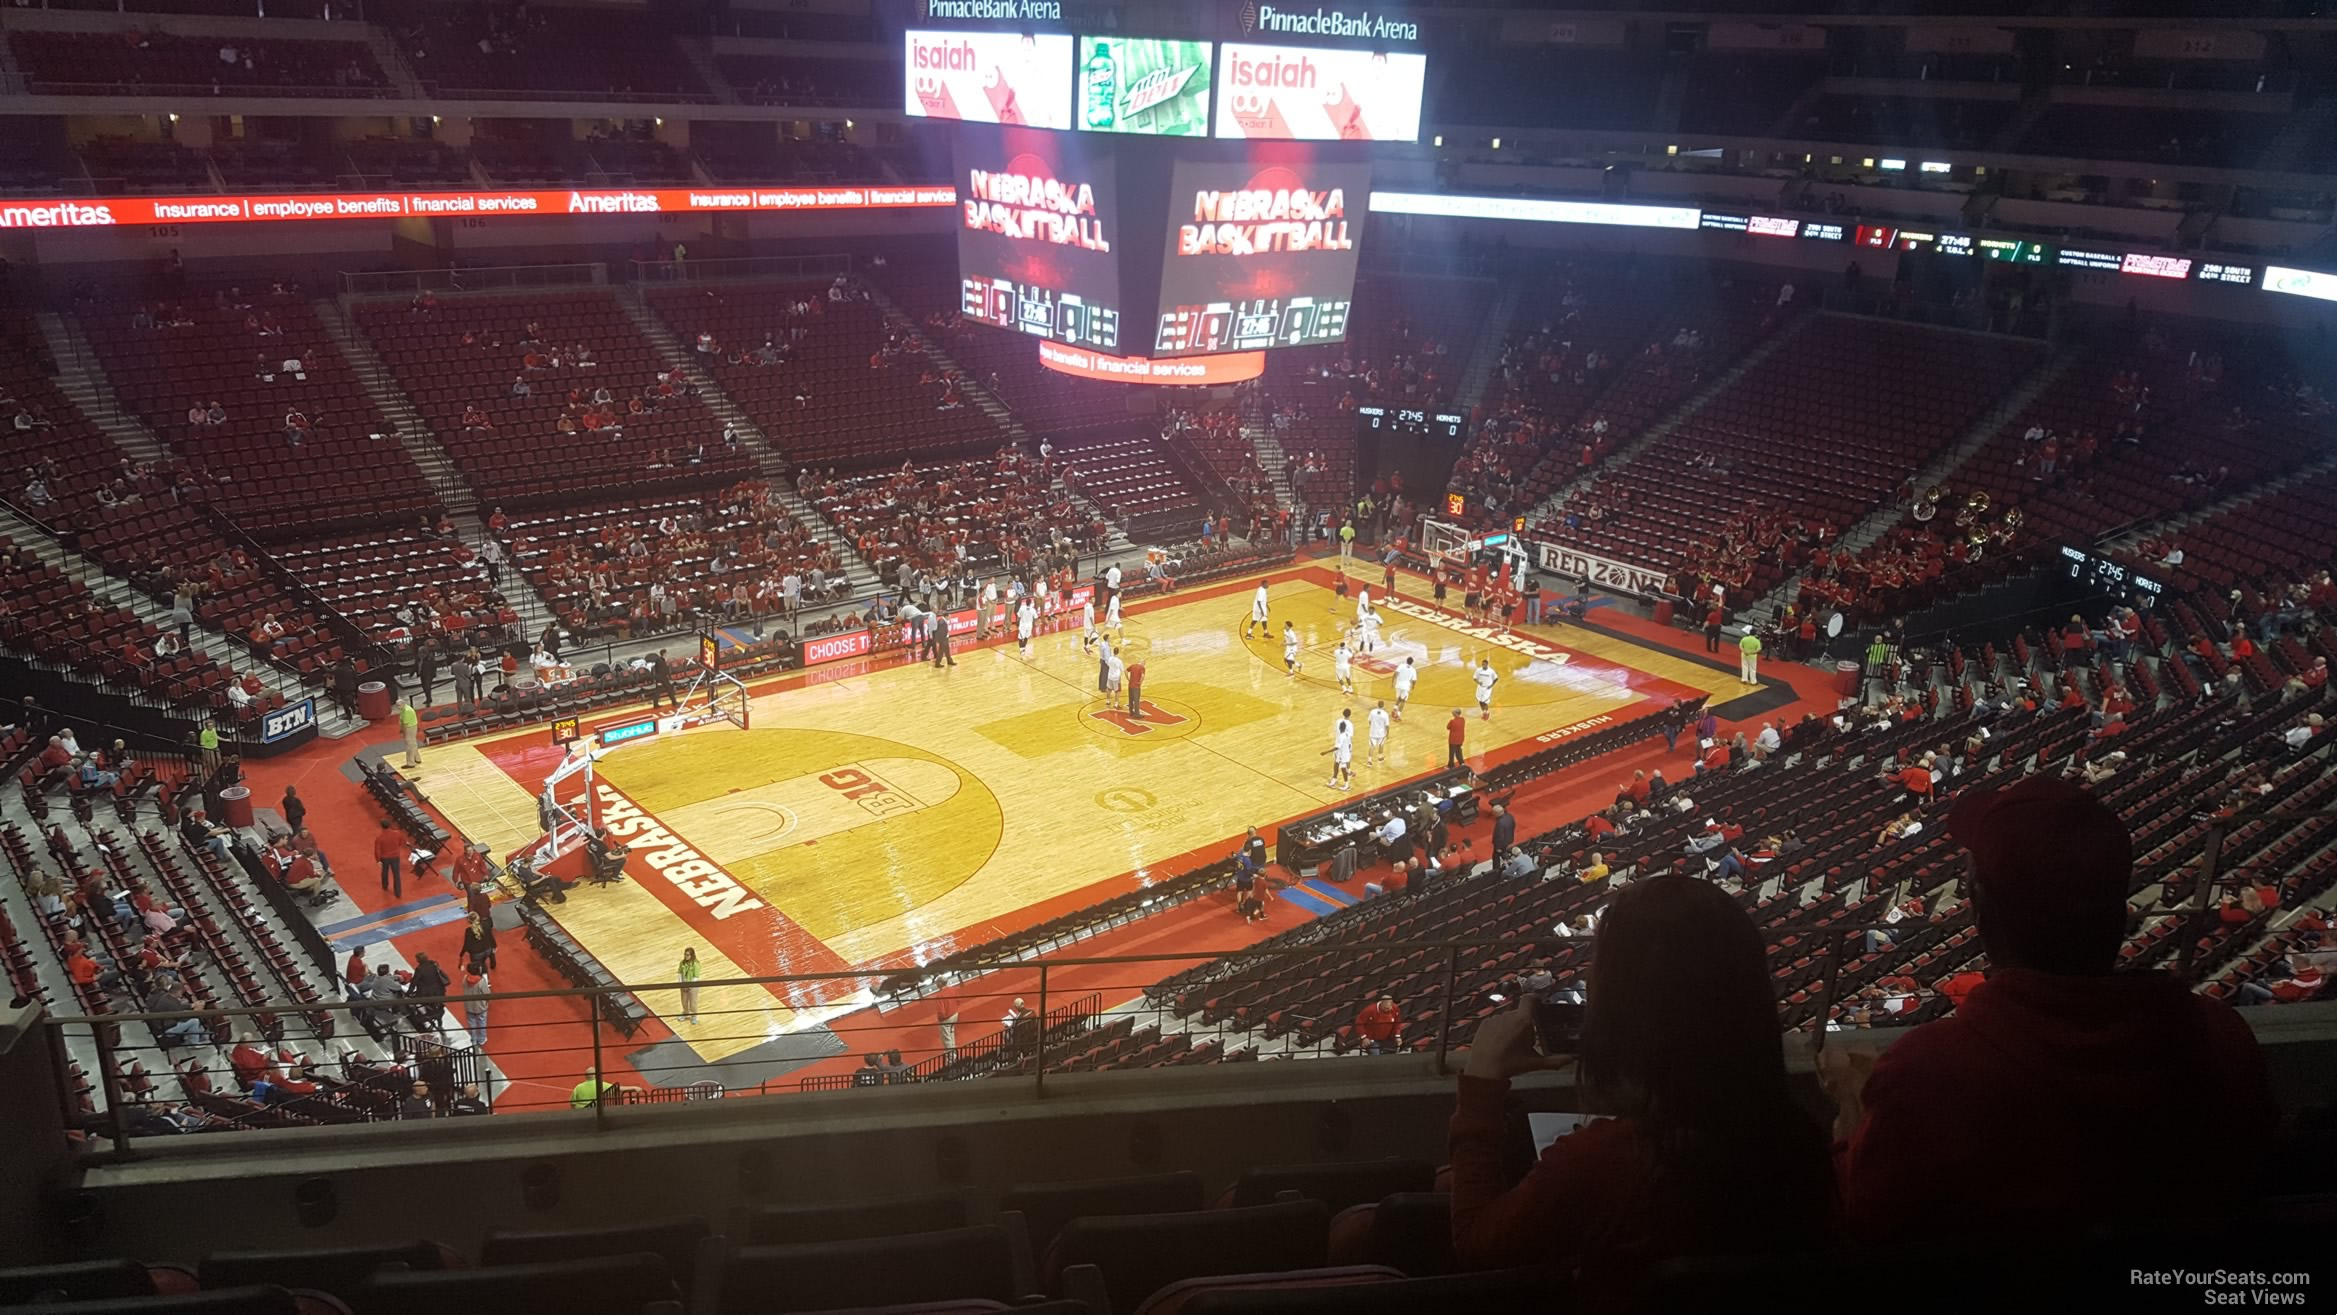 section 222, row 3 seat view  for basketball - pinnacle bank arena